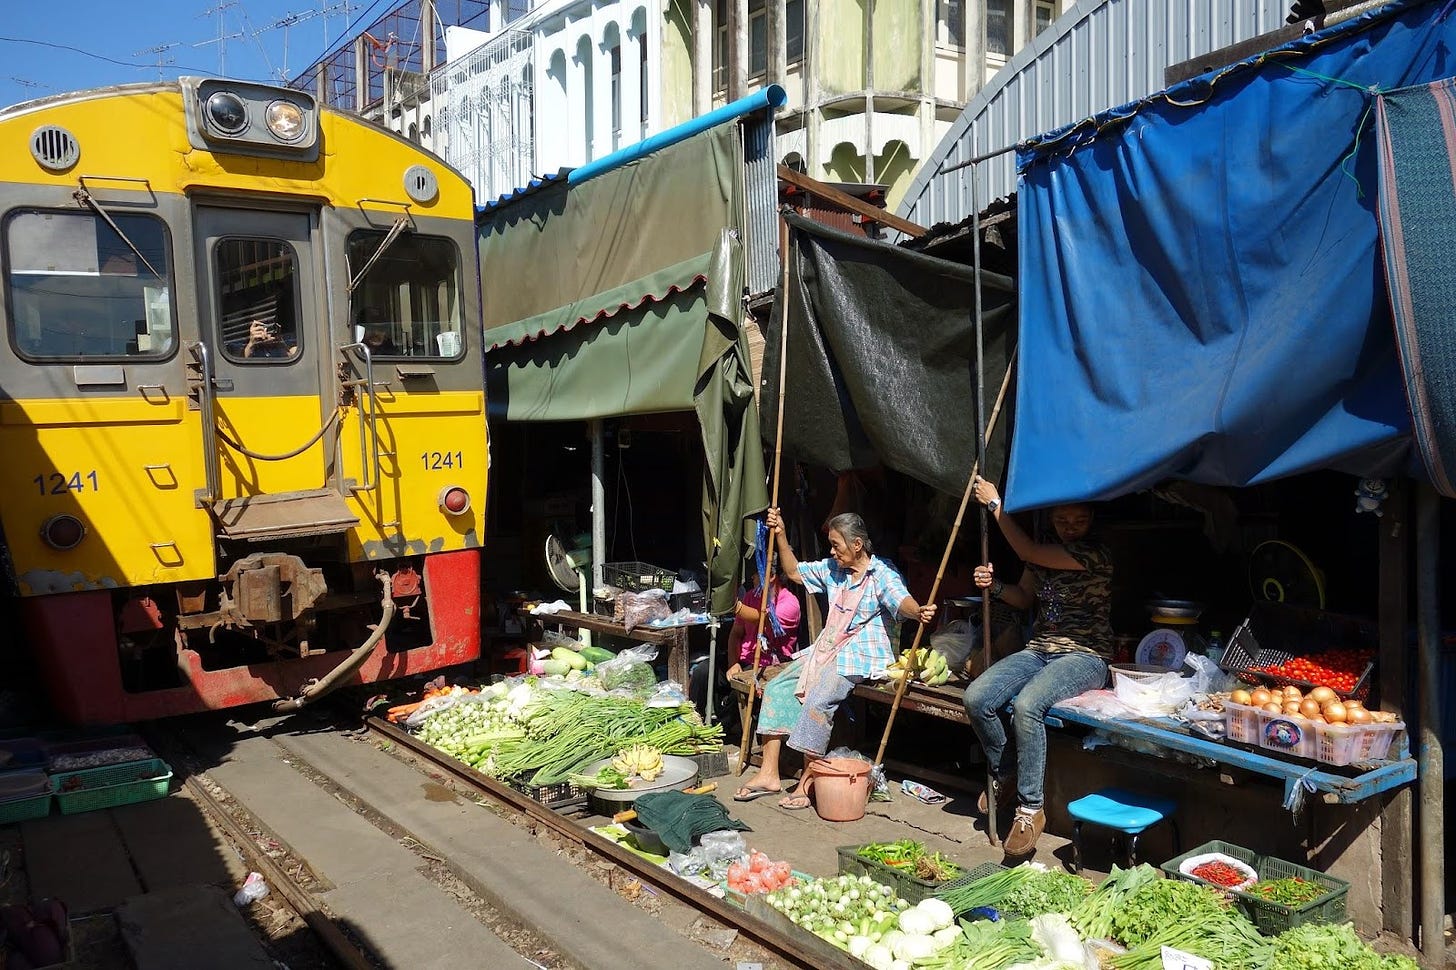 A railway with a train passing extremely close to market shops. The train passes OVER produce arrayed for the market and the shops have folded in their canopies which just barely clear the train. Shopkeepers sit on benches watching the train pass within feet of them.